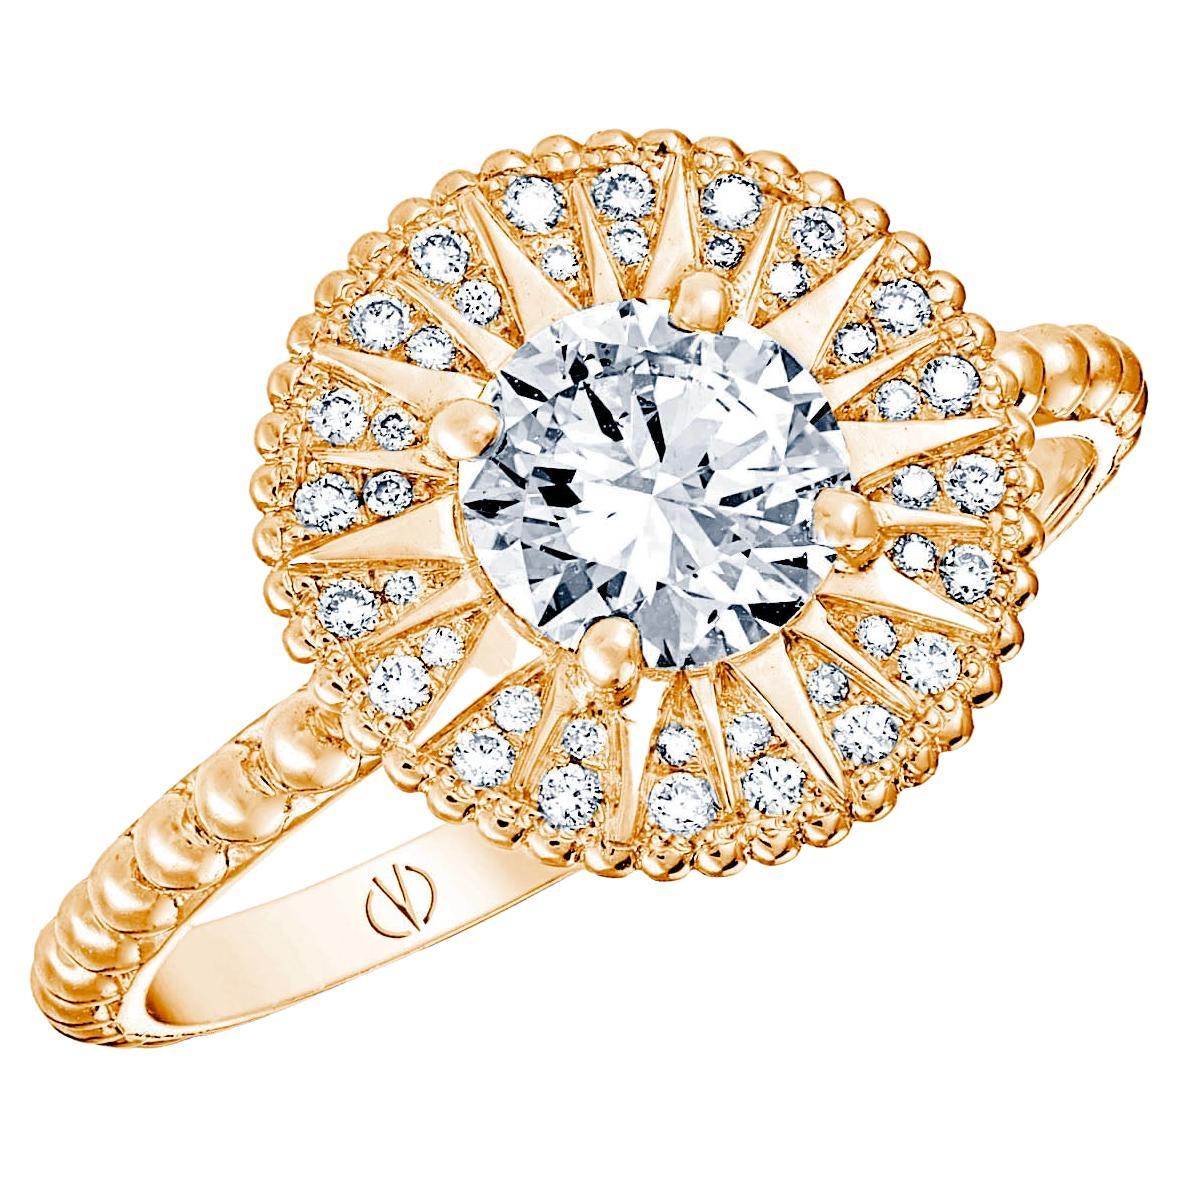 For Sale:  18k Yellow Gold Roi Soleil 0.50 Ct Diamond Ring set with 0.16 Cts of Diamonds